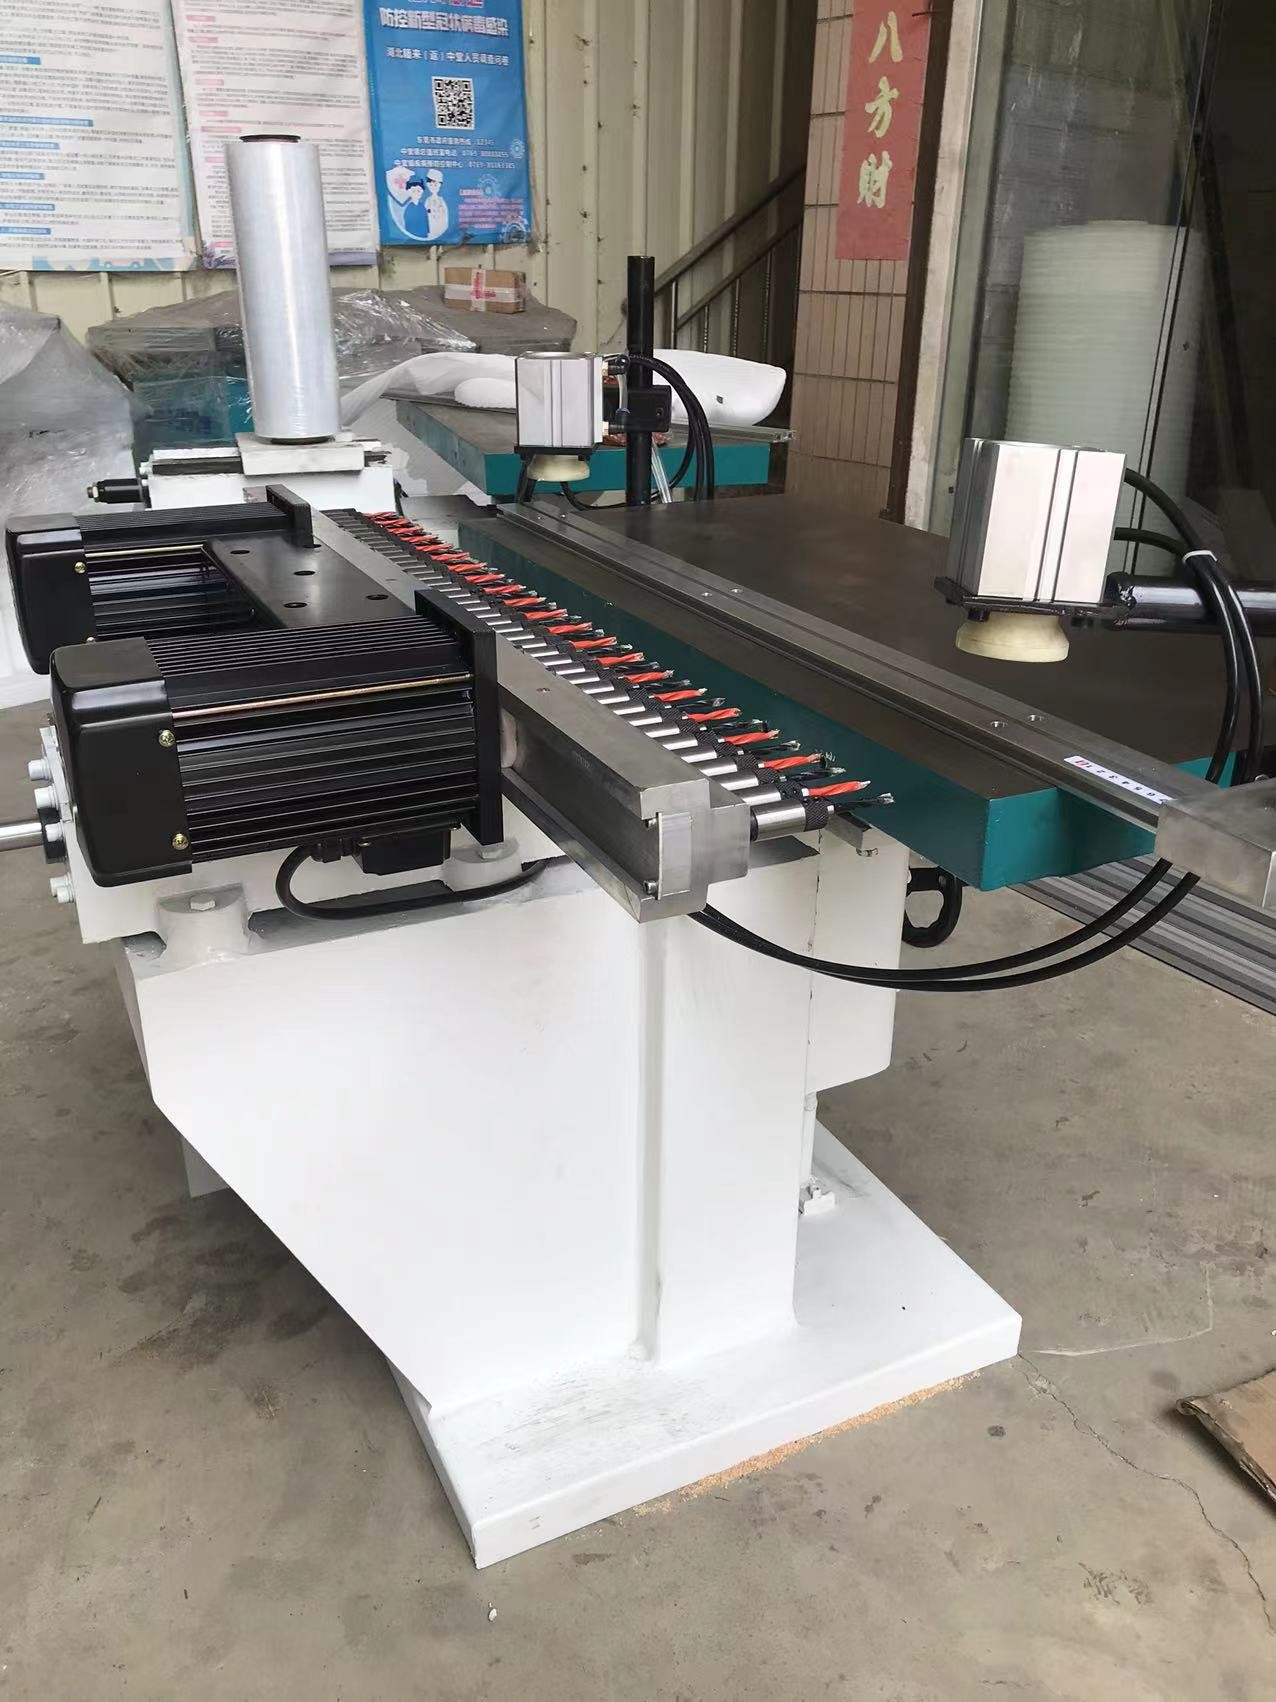 plantation shutters machines Stiles drilling machine Multis-spindle boring machine for wood  pvc  products